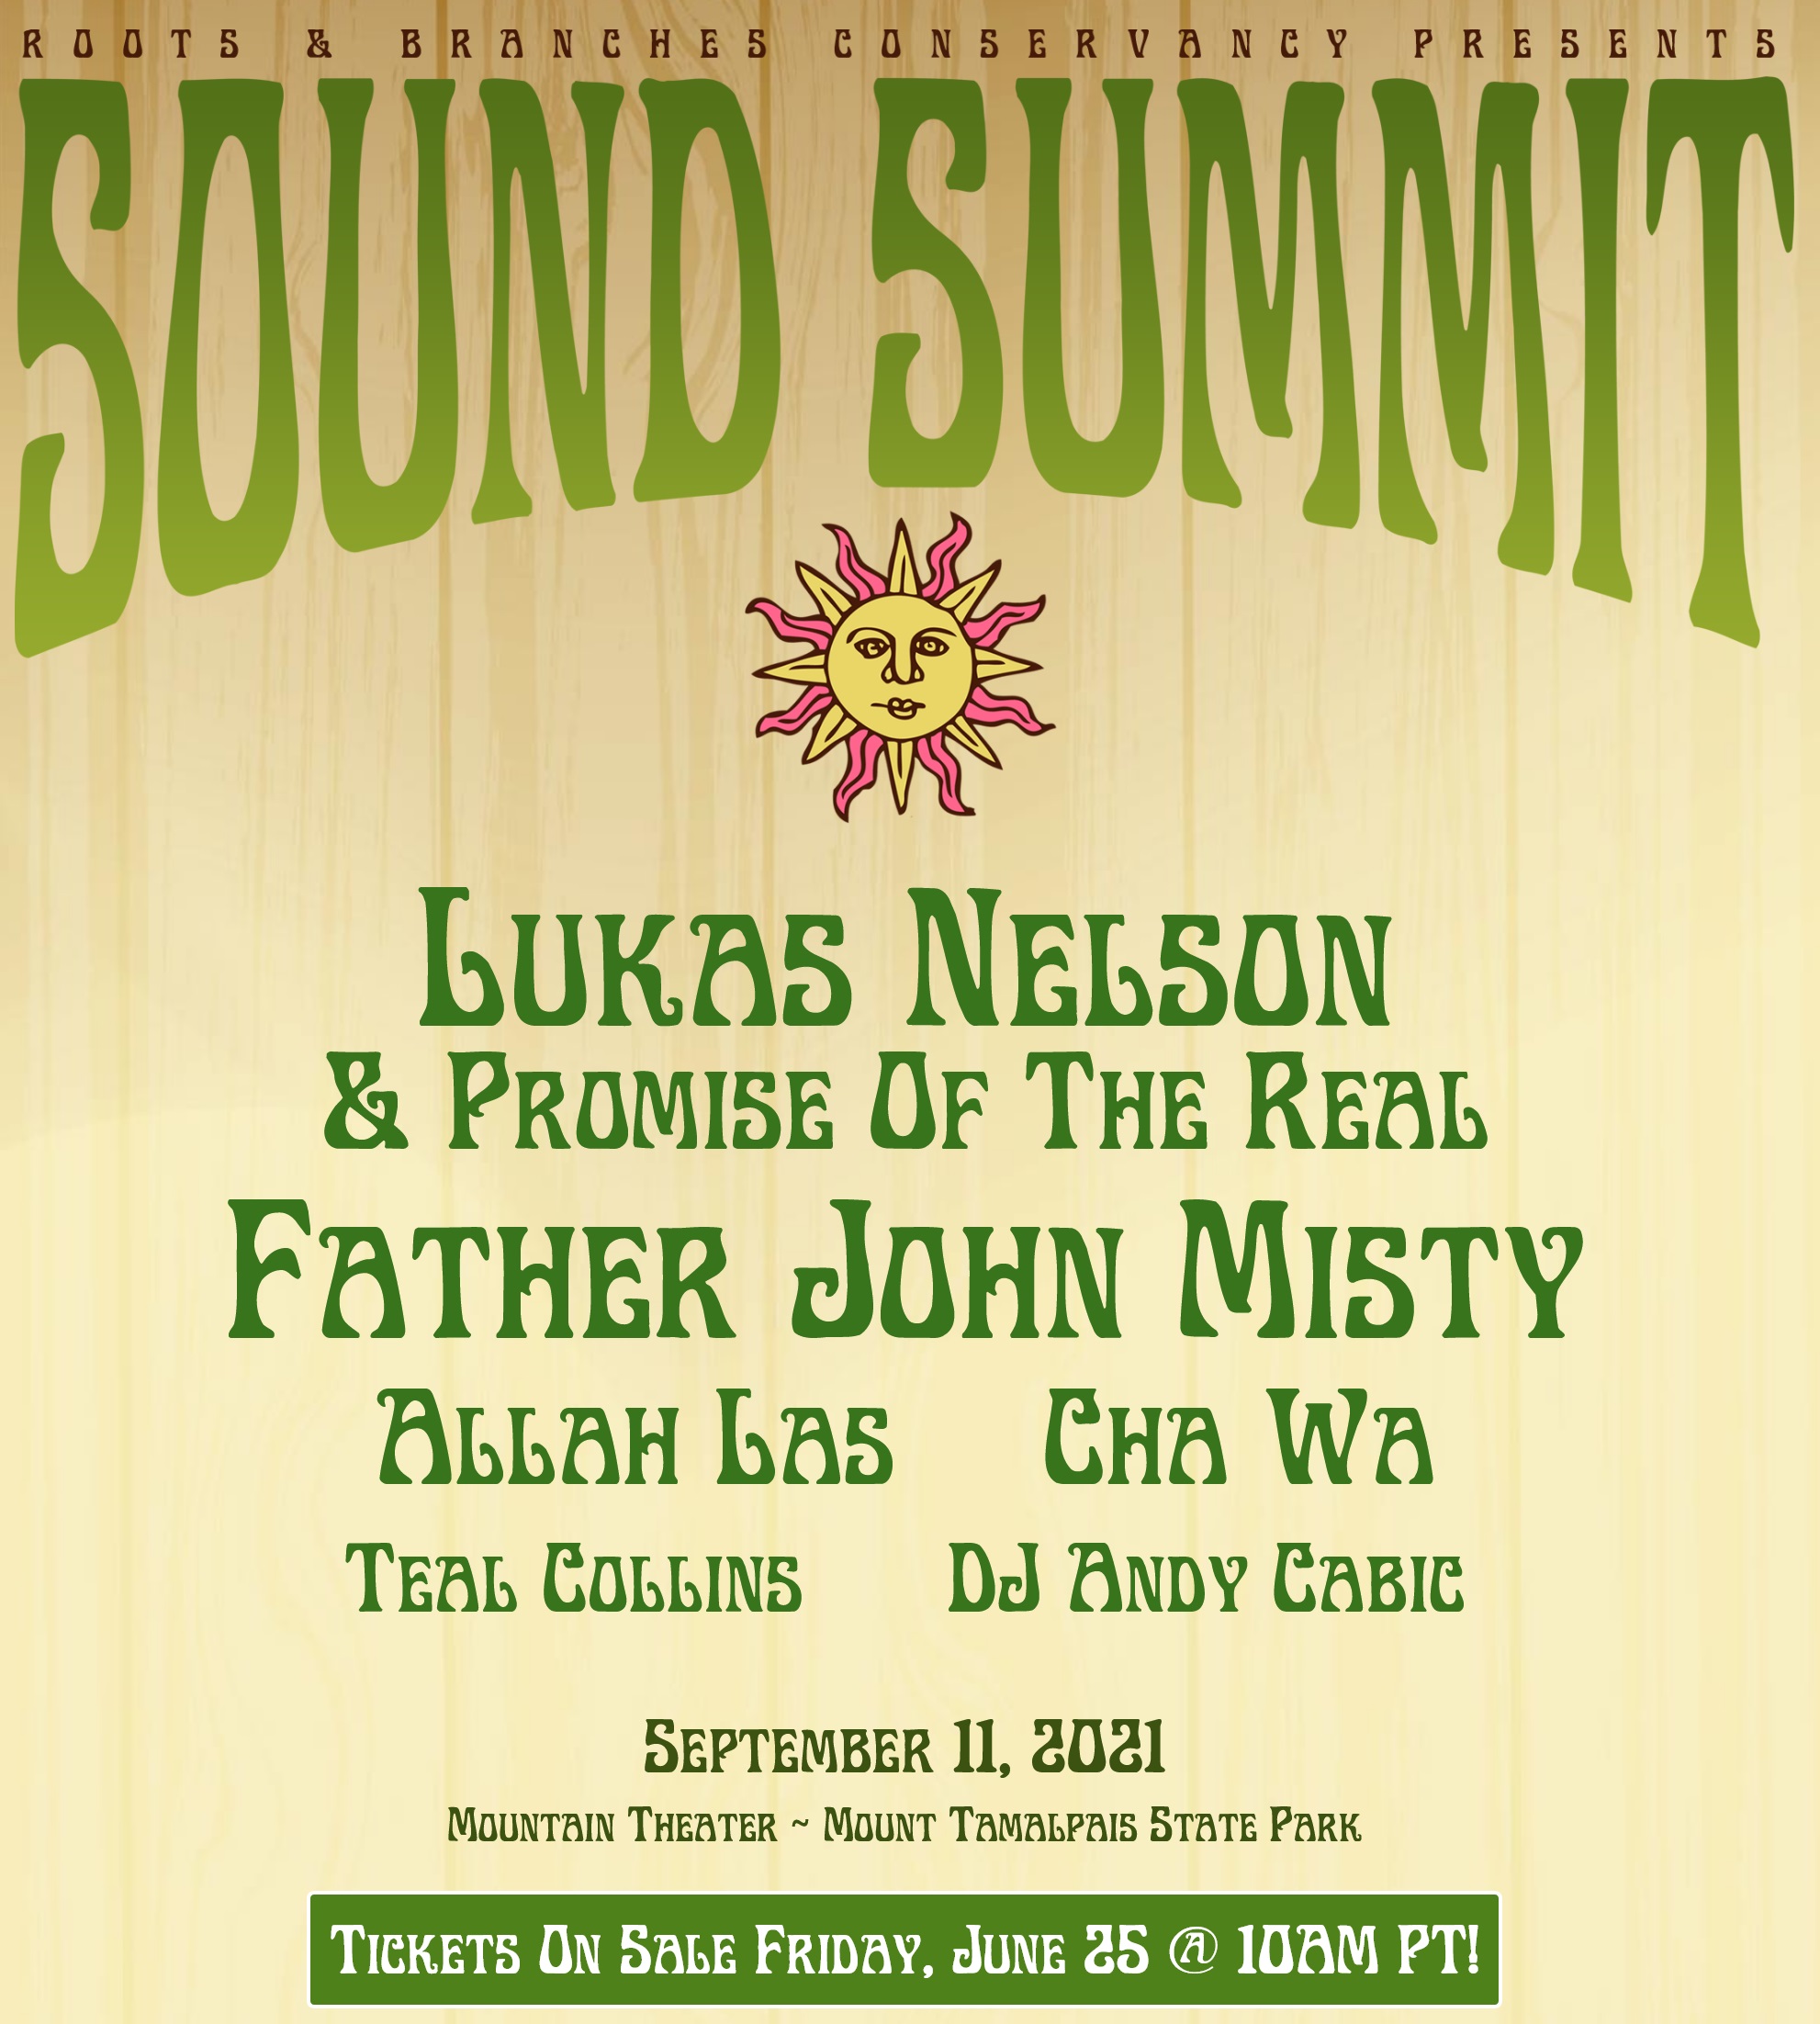 Sound Summit Returns to Mt Tam w/ Lukas Nelson & POTR, Father John Misty and More